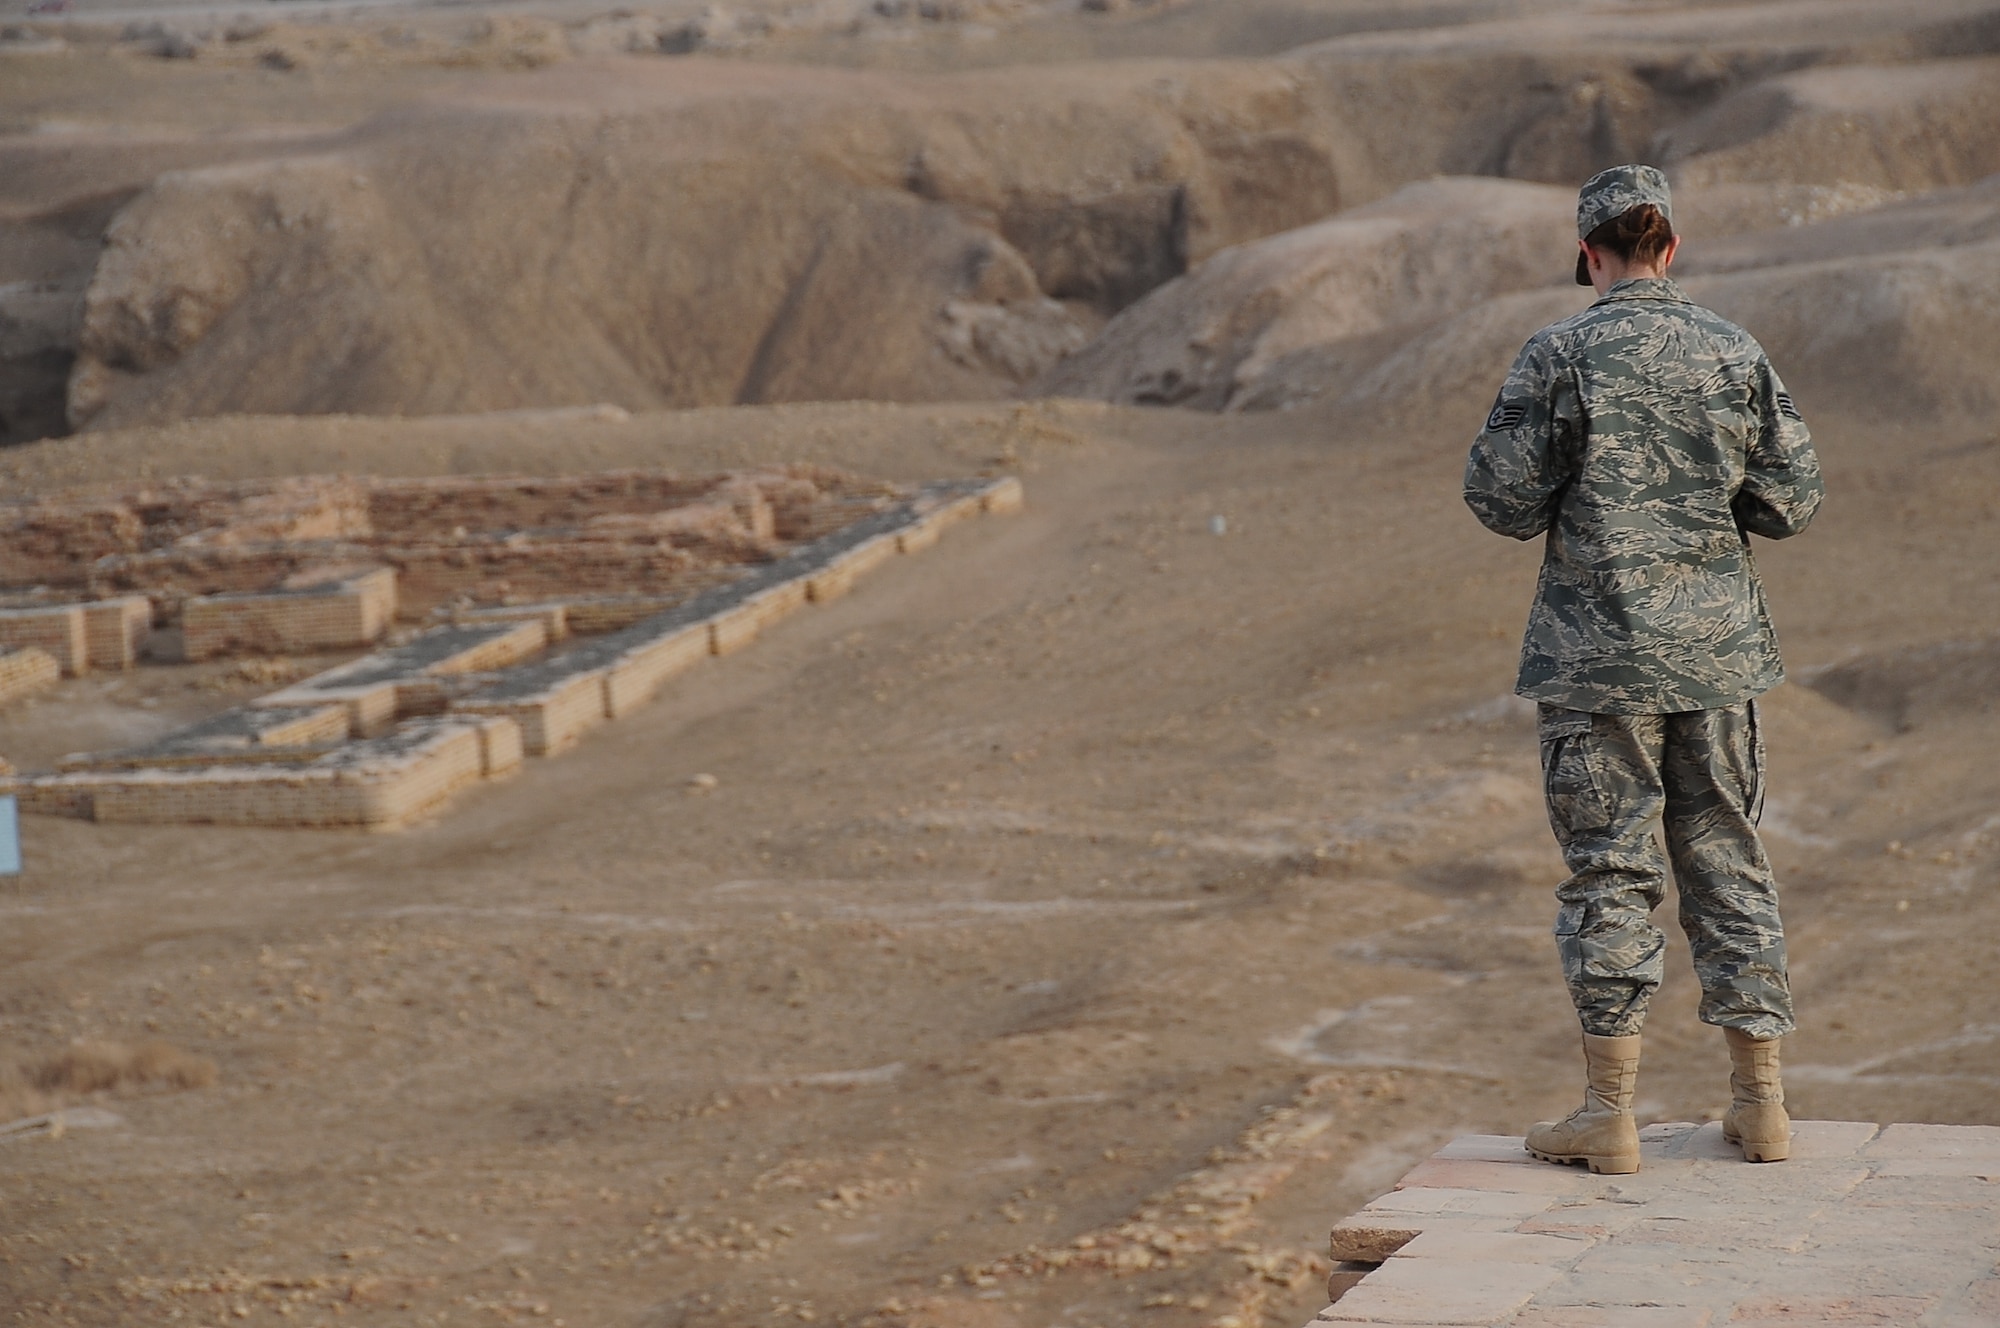 ALI BASE, Iraq – Staff Sgt. Ariel Sauvey, 407th Expeditionary Operation Support Squadron, takes in the view of the ruins of King Shulgi’s palace from atop the Great Ziggurat of Ur Feb. 9. The Ziggurat construction was finished in the 21st century B.C. by King Shulgi in the ancient city of Ur, which is near An Nasiriyah in present-day Iraq. Members of the 407th Air Expeditionary Group Chaplains Office offer three tours weekly of the Ziggurat and ruins of the city of Ur.  Sergeant Sauvey is deployed to Ali from the 78th Operation Support Squadron, Robins Air Force Base, Ga., and hails from Greenville, Ohio.  (U.S. Air Force photo/Staff Sgt. Christopher Marasky)